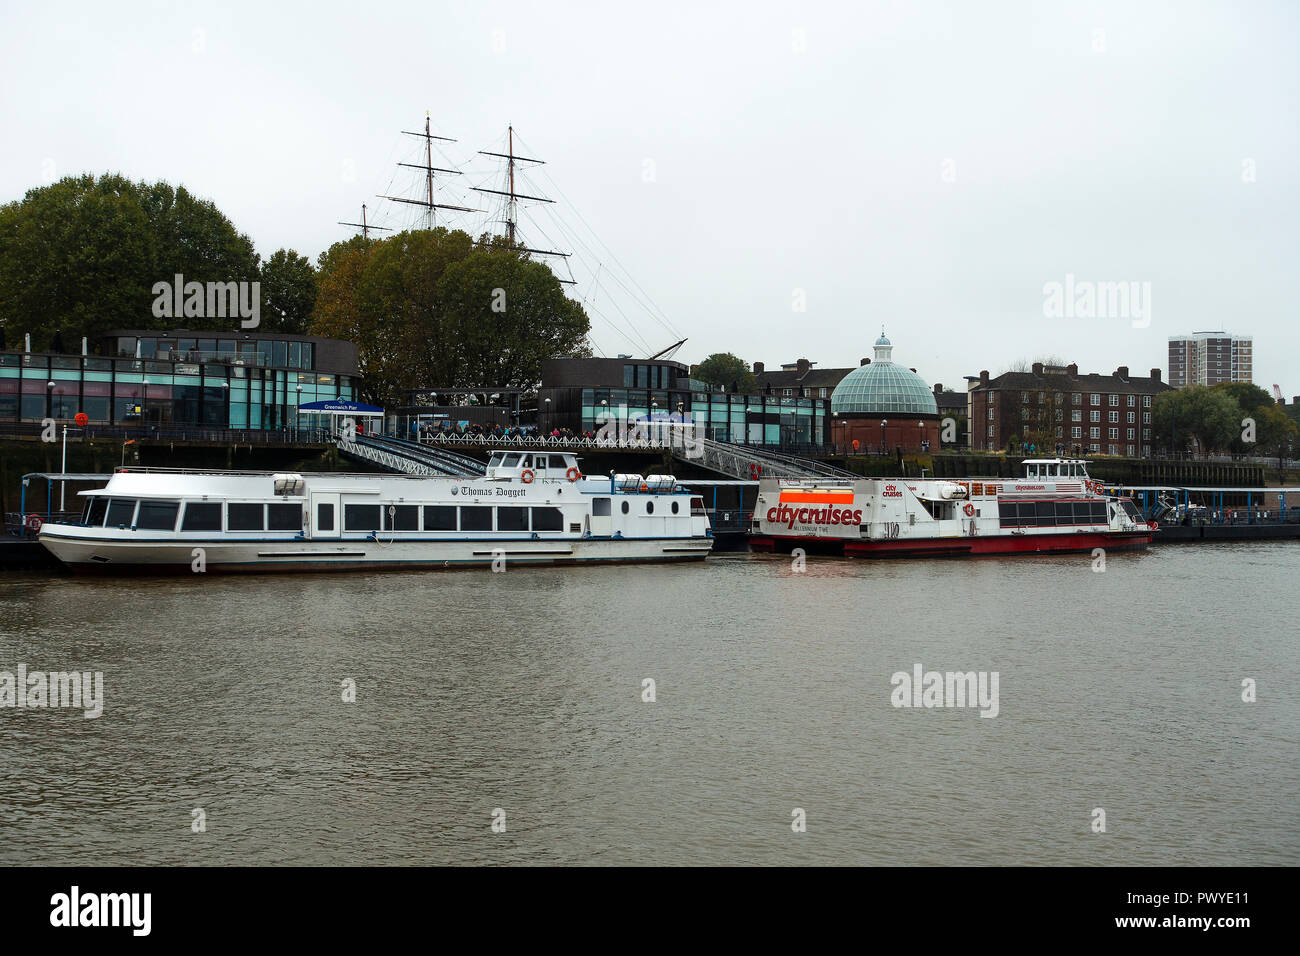 River Cruise Ferry Boats Moored at Greenwich Pier on the River Thames with Cutty Sark in Background Greenwich London England United Kingdom UK Stock Photo